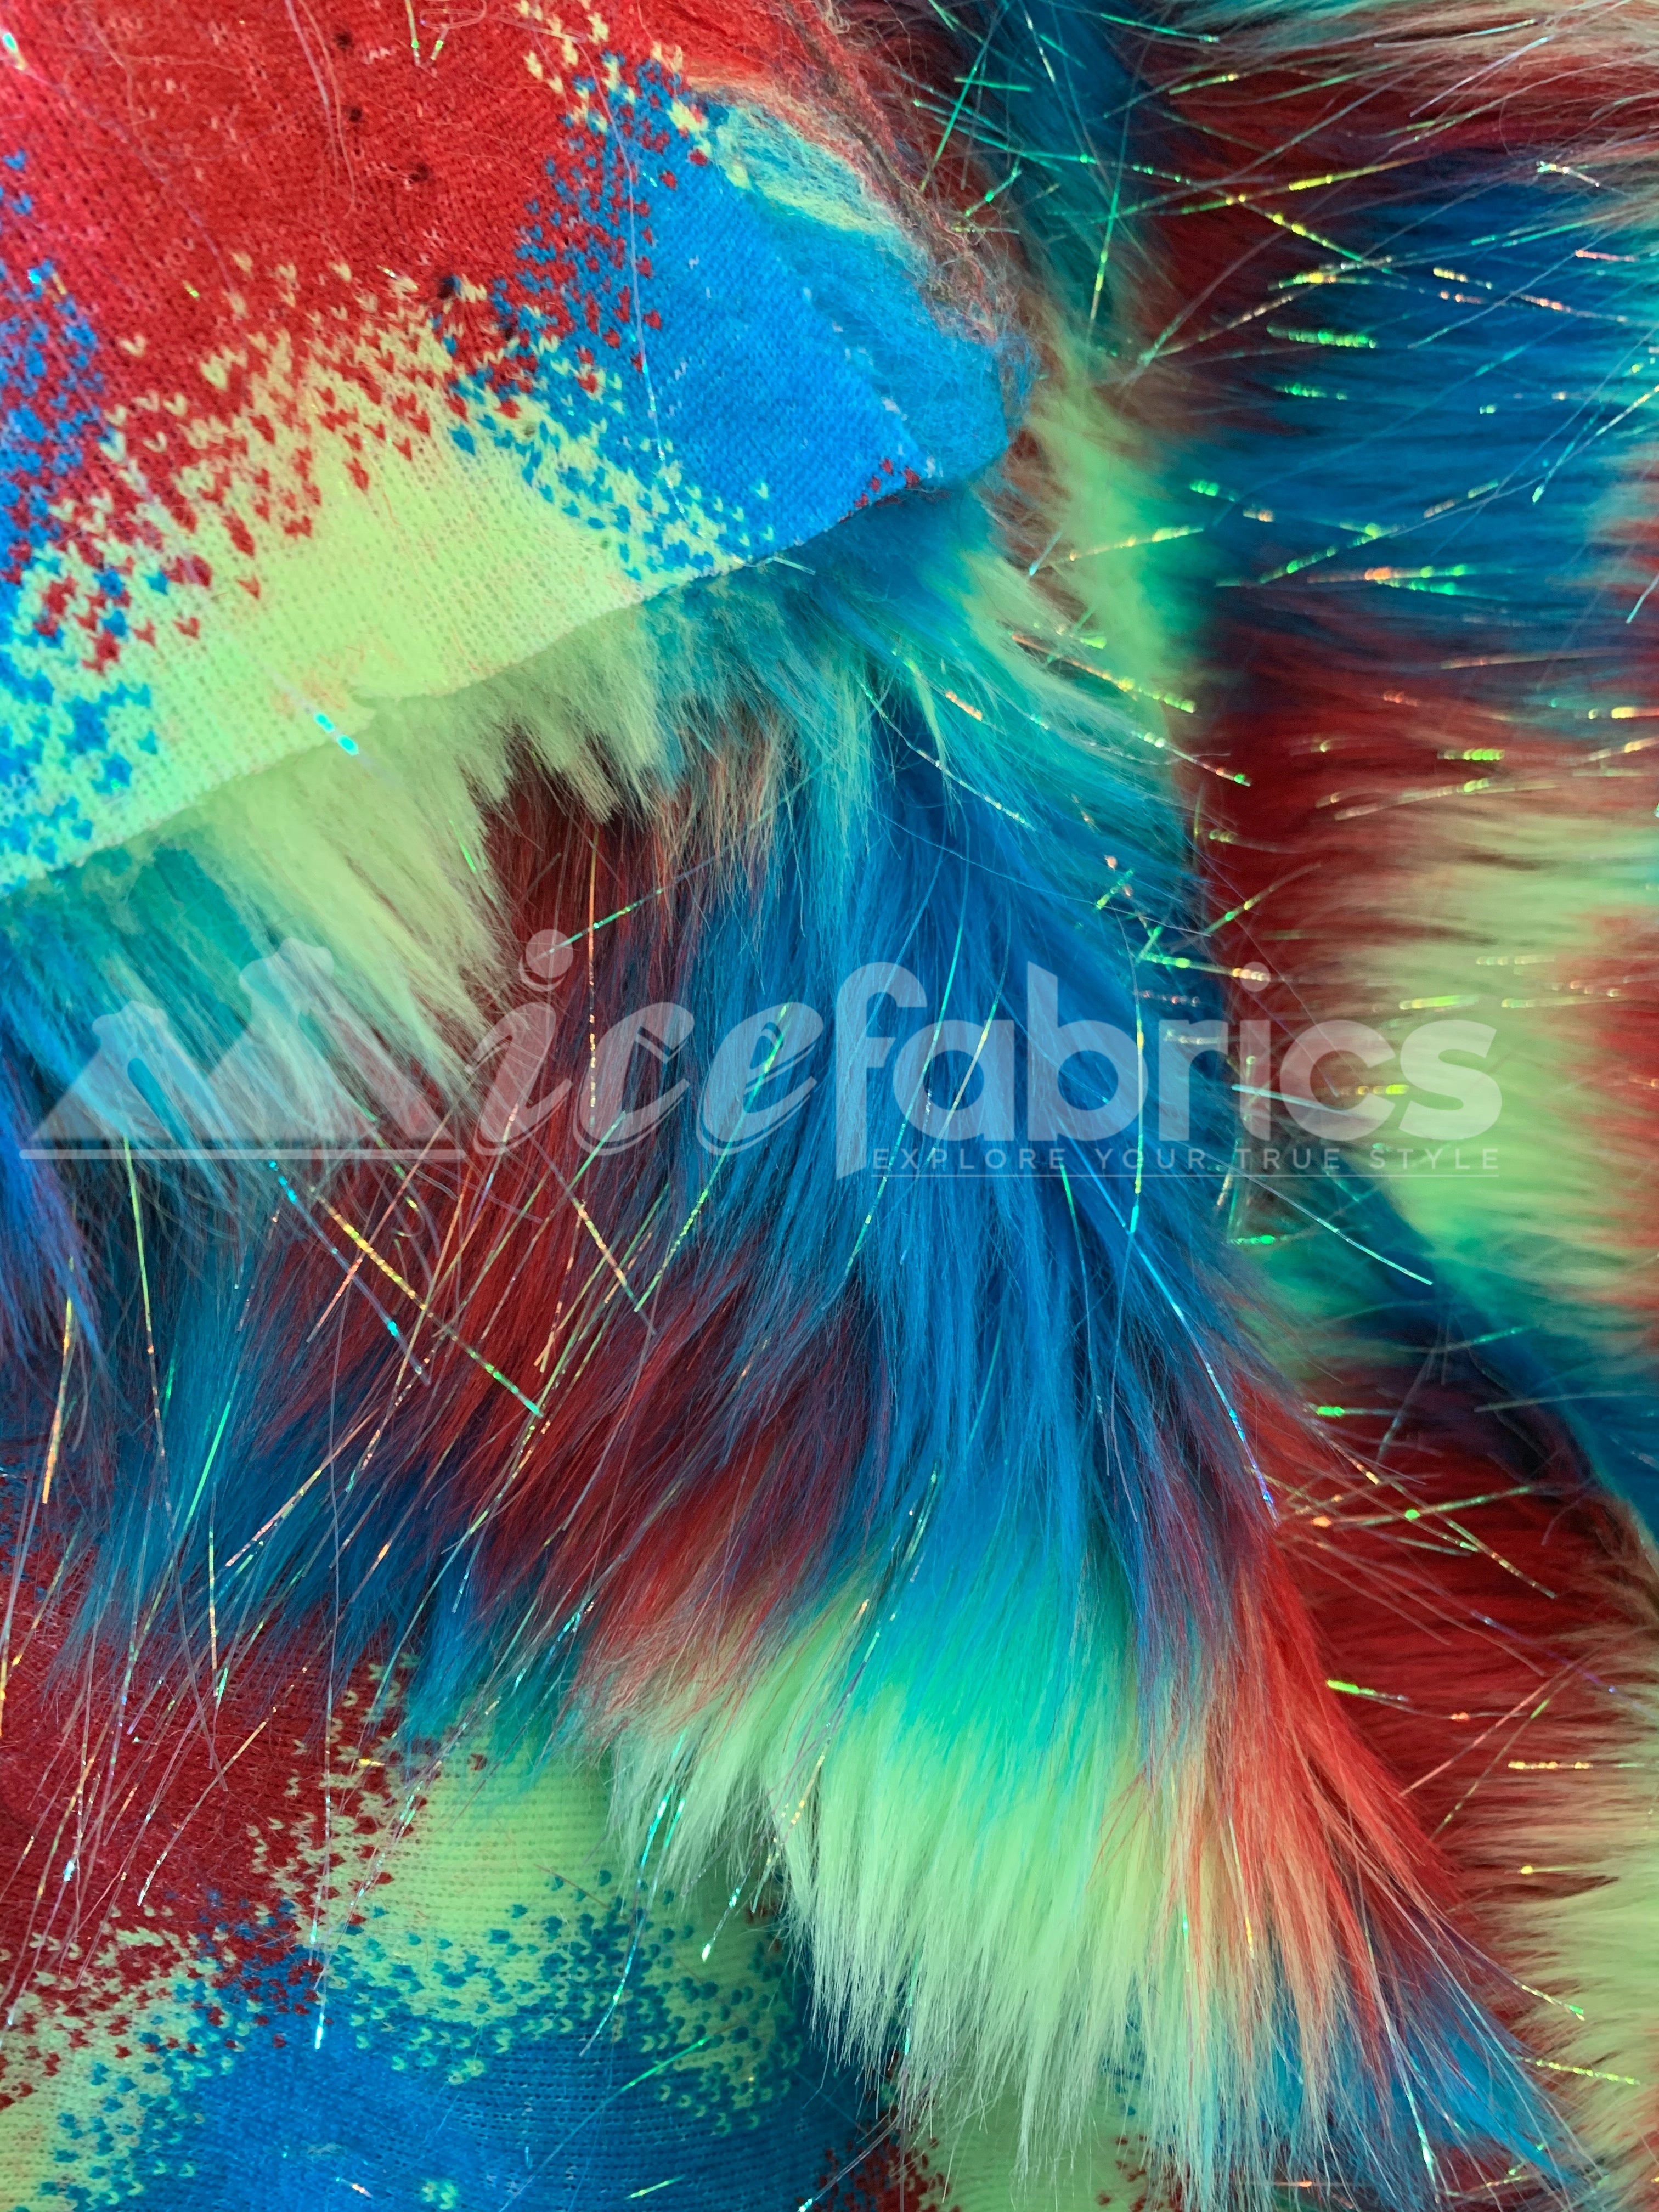 3 Tone Rainbow Tinsel 3.5" long Pile Red, Blue, and Green Faux Fur Fabric By The YardICEFABRICICE FABRICSBy The Yard (60 inches Wide)3 Tone Rainbow Tinsel 3.5" long Pile Red, Blue, and Green Faux Fur Fabric By The Yard ICEFABRIC